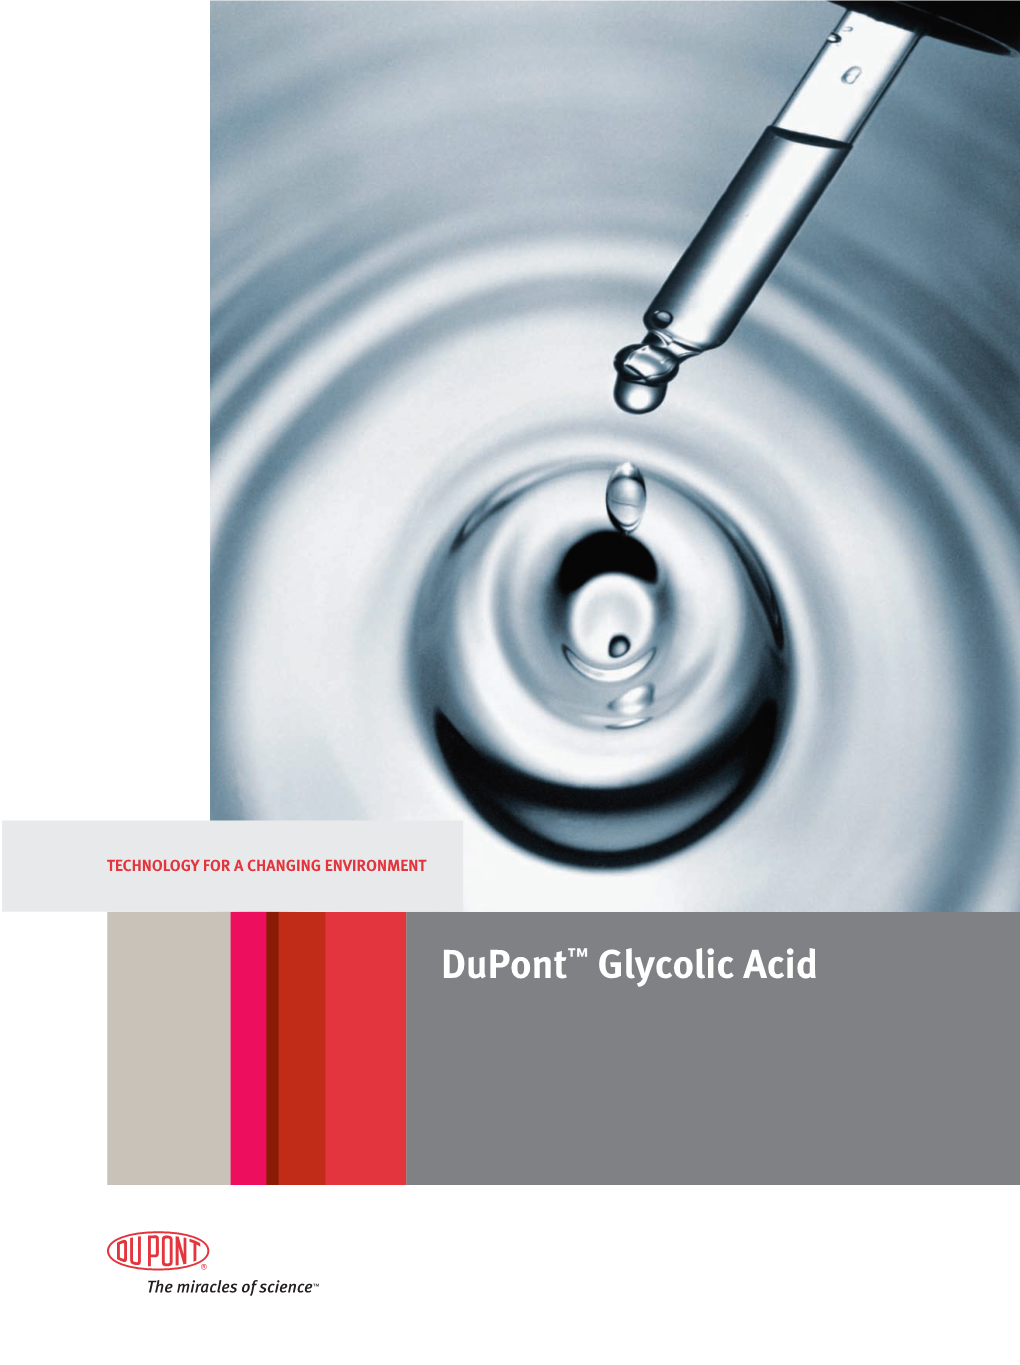 Dupont™ Glycolic Acid… a Versatile and Effective Solution for a Broad Range of Cleaning and Industrial Applications